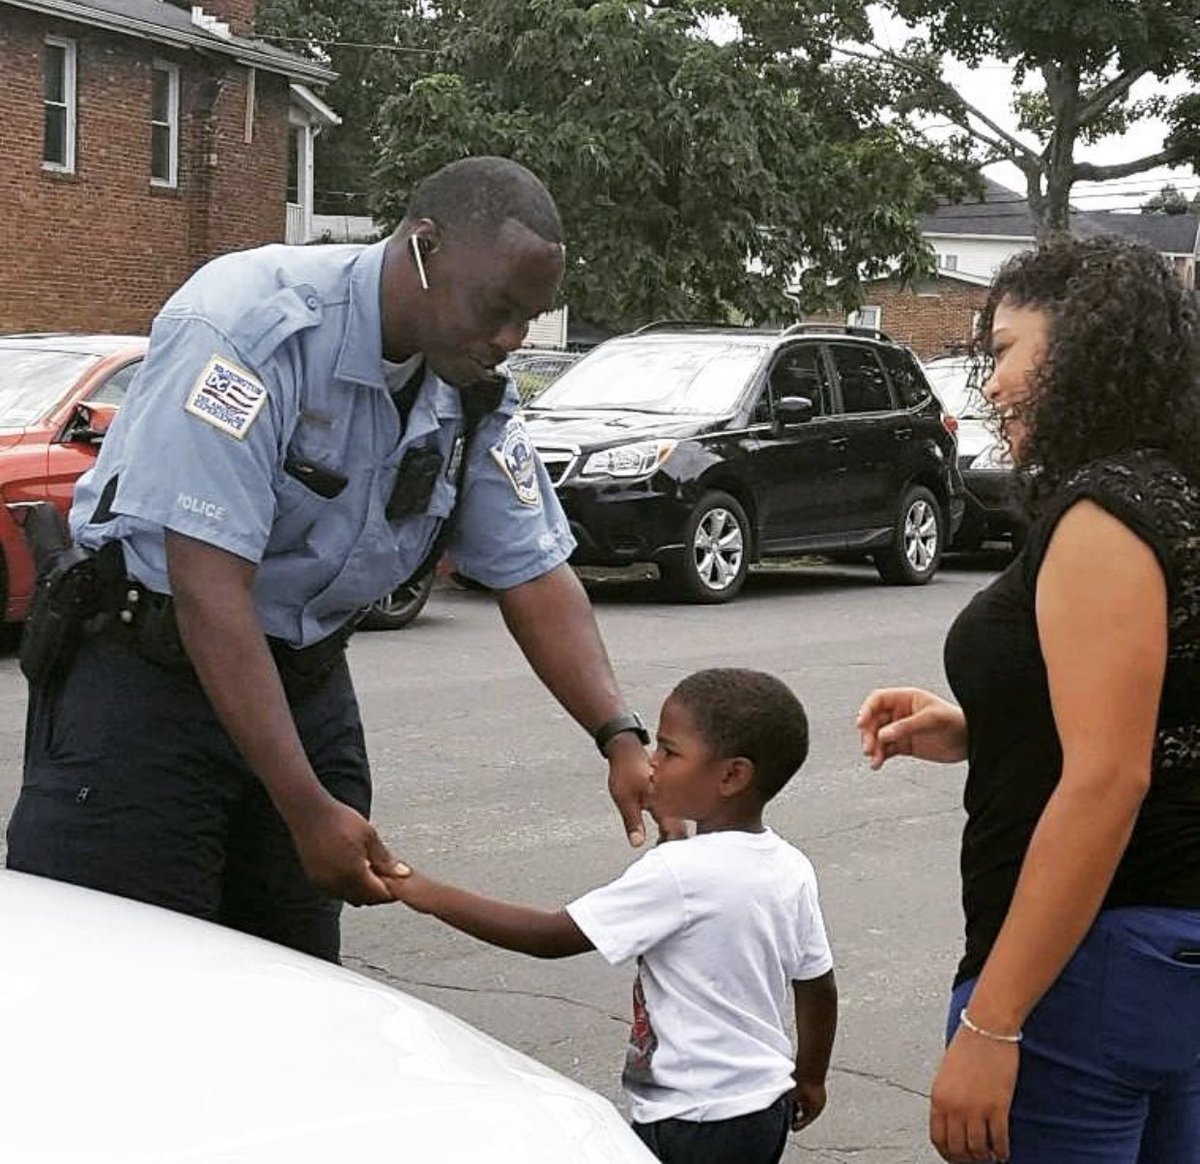 When this little boy walked up to Officer Fulcher to show him his toy police car, Officer Fulcher invited him into his cruiser to see a real police car. He turned on the sirens.His mom said, “thank you, you have no idea how much this means to him!”  #BacktheBlue